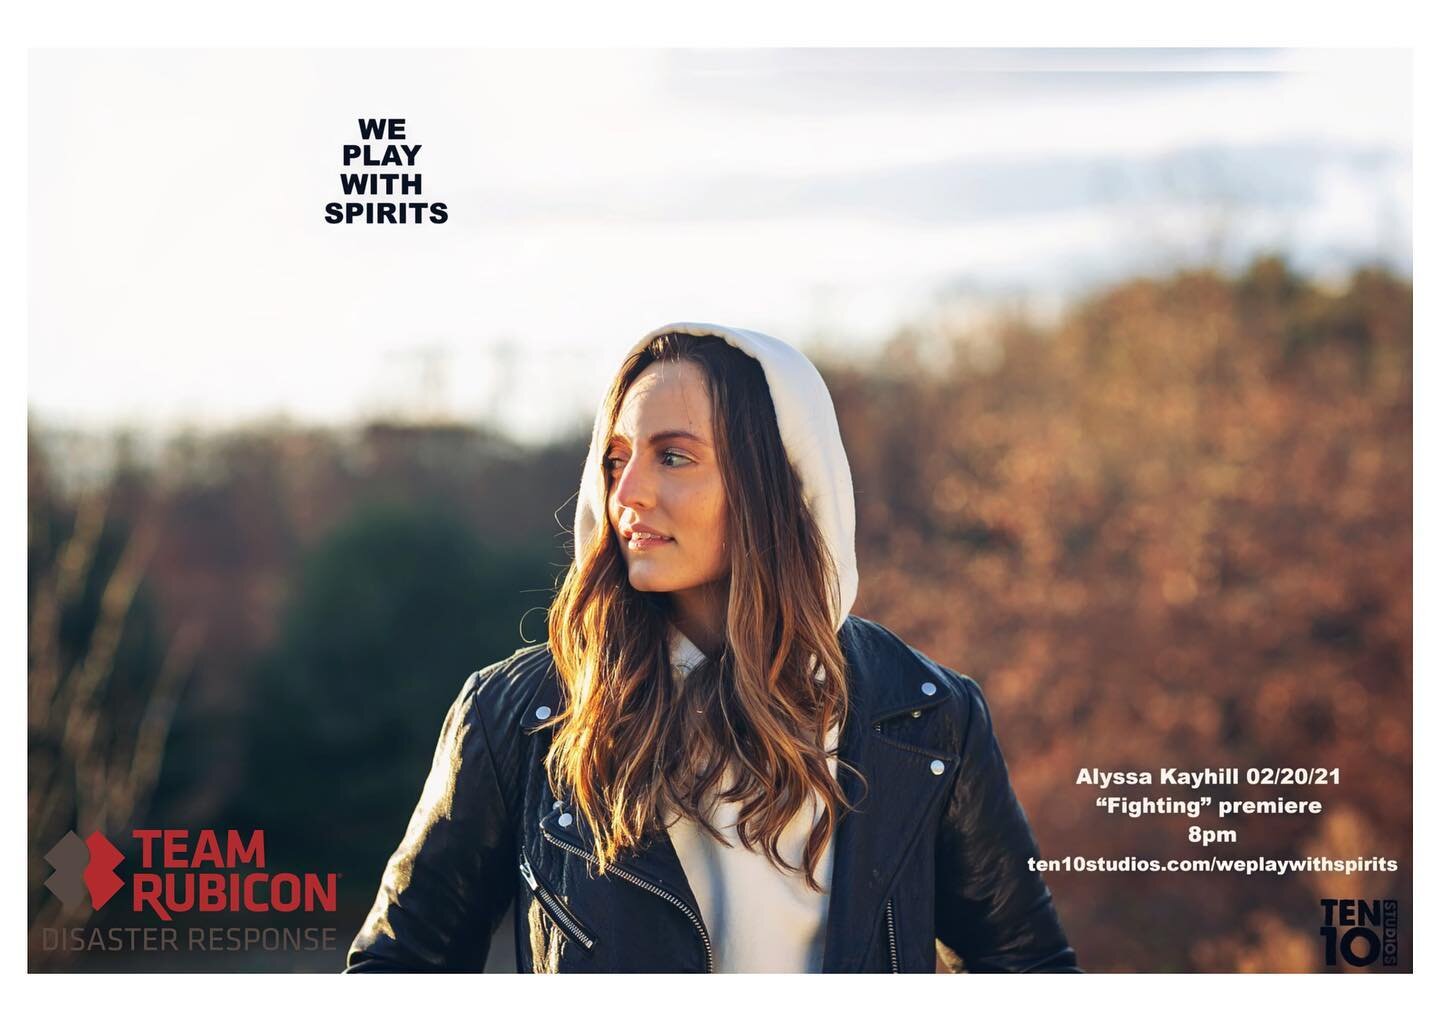 Can&rsquo;t wait to chat with @jacko.nyc tomorrow and perform my new song &ldquo;Fighting,&rdquo; live at Ten10 studios as part of their We Play With Spirits series. I&rsquo;ll be teaming up with the amazing charity organization @teamrubicon to raise